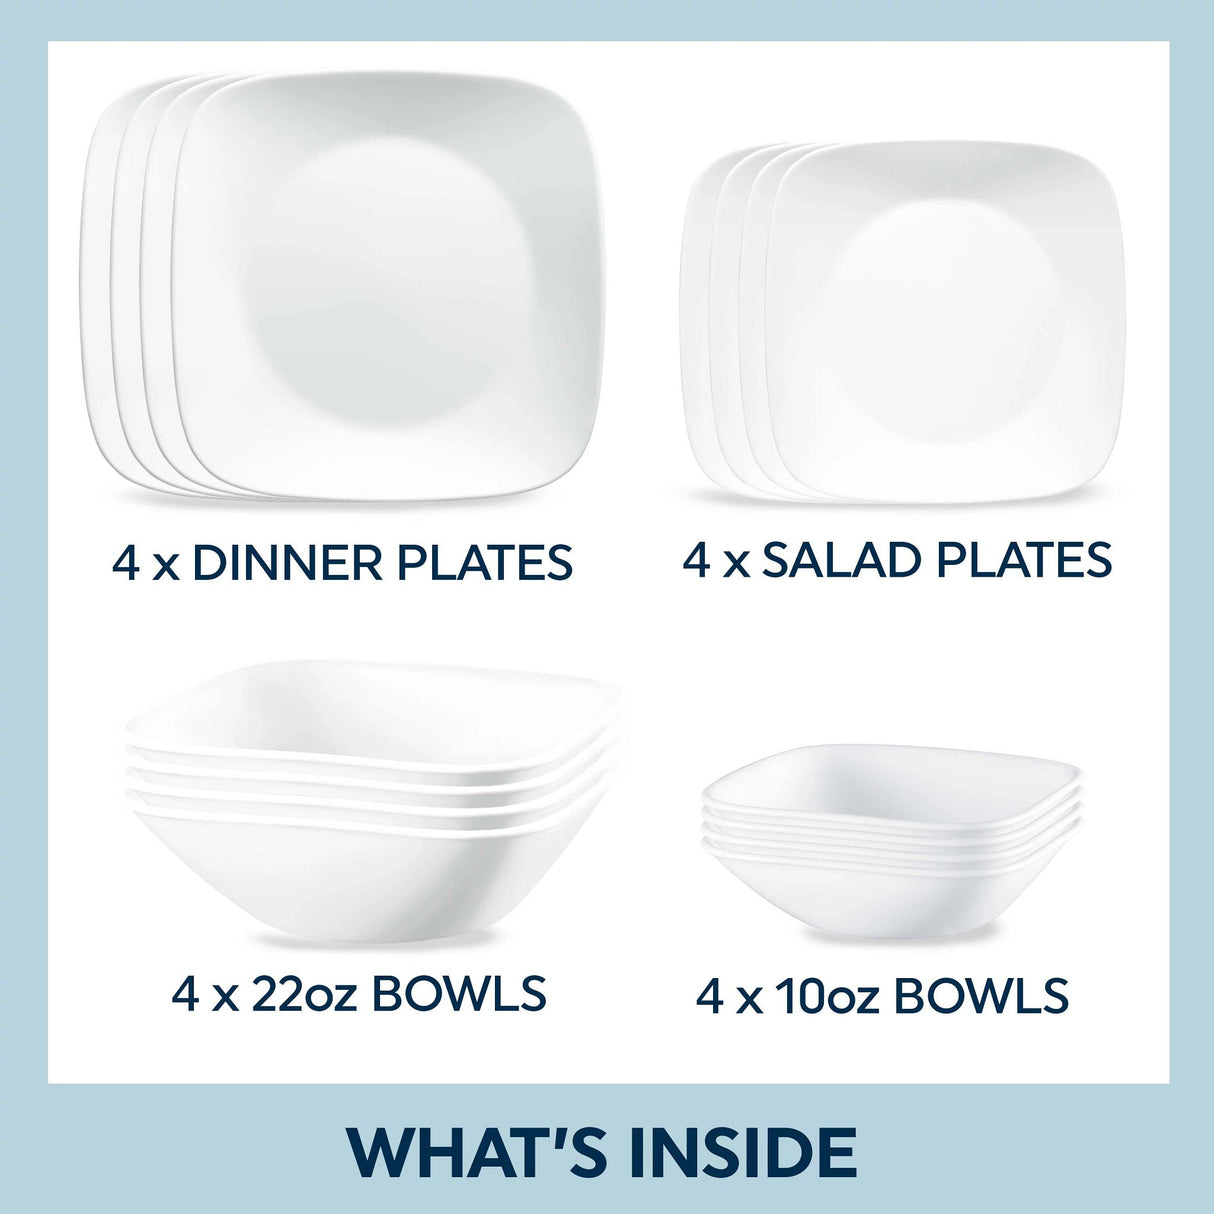  Photo of Vivid White plates &amp; bowls with that says what' inside